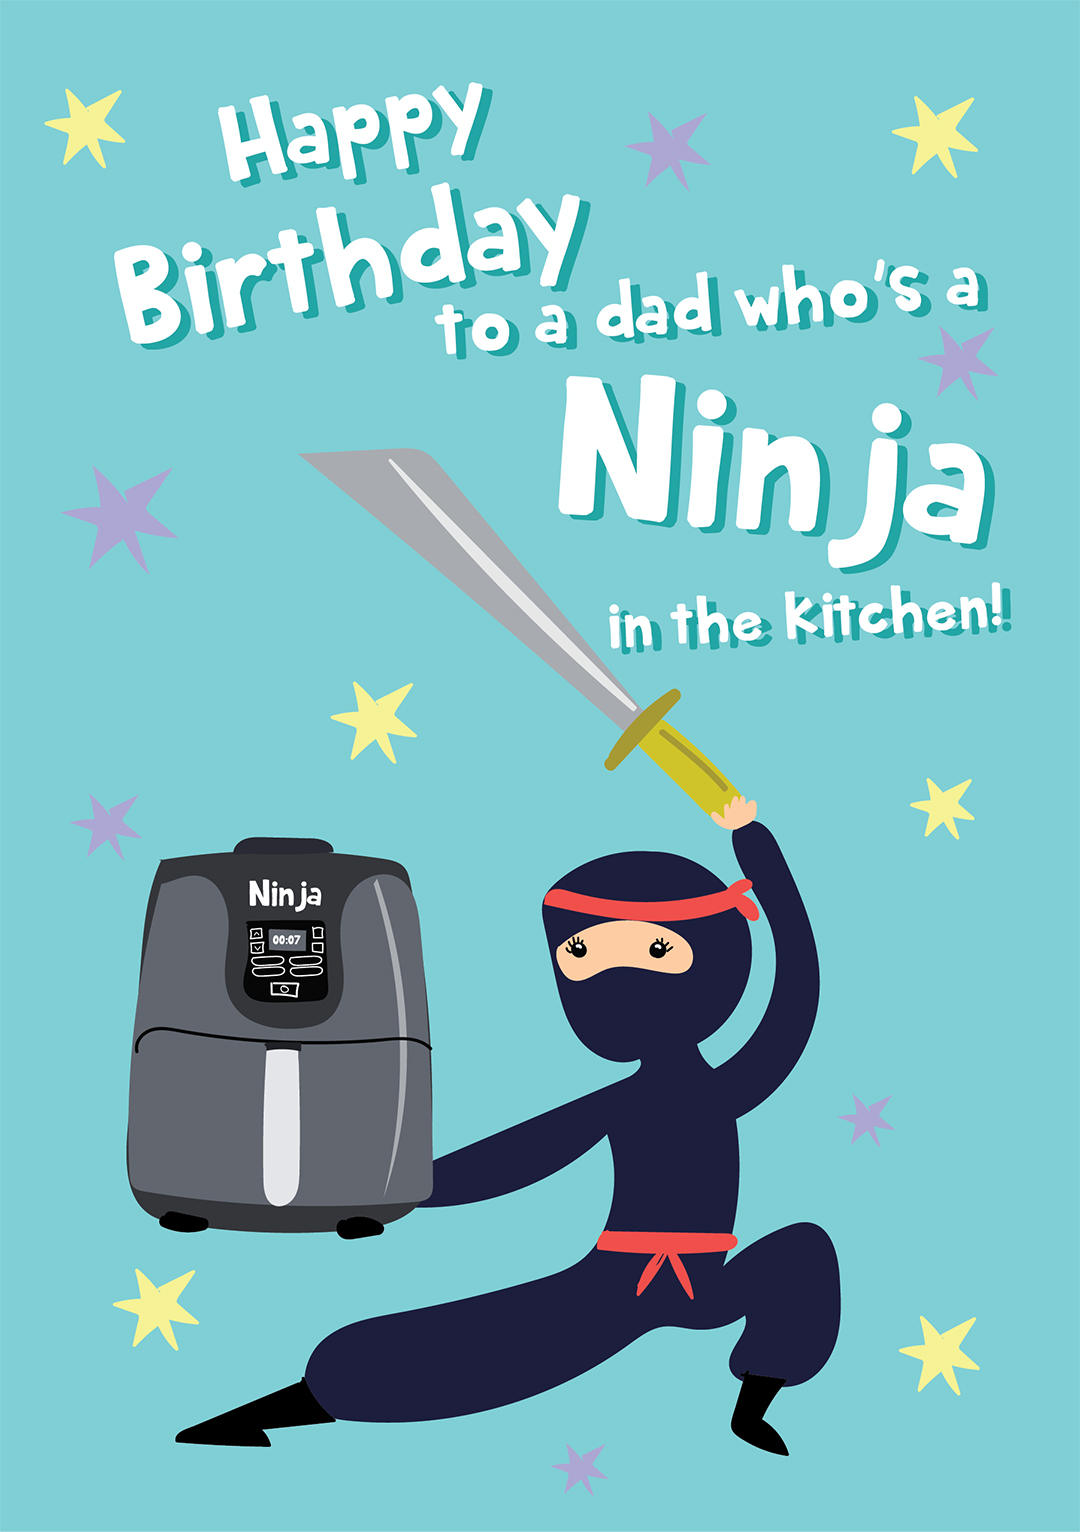 HB To A Dad Who's A Ninja In The Kitchen